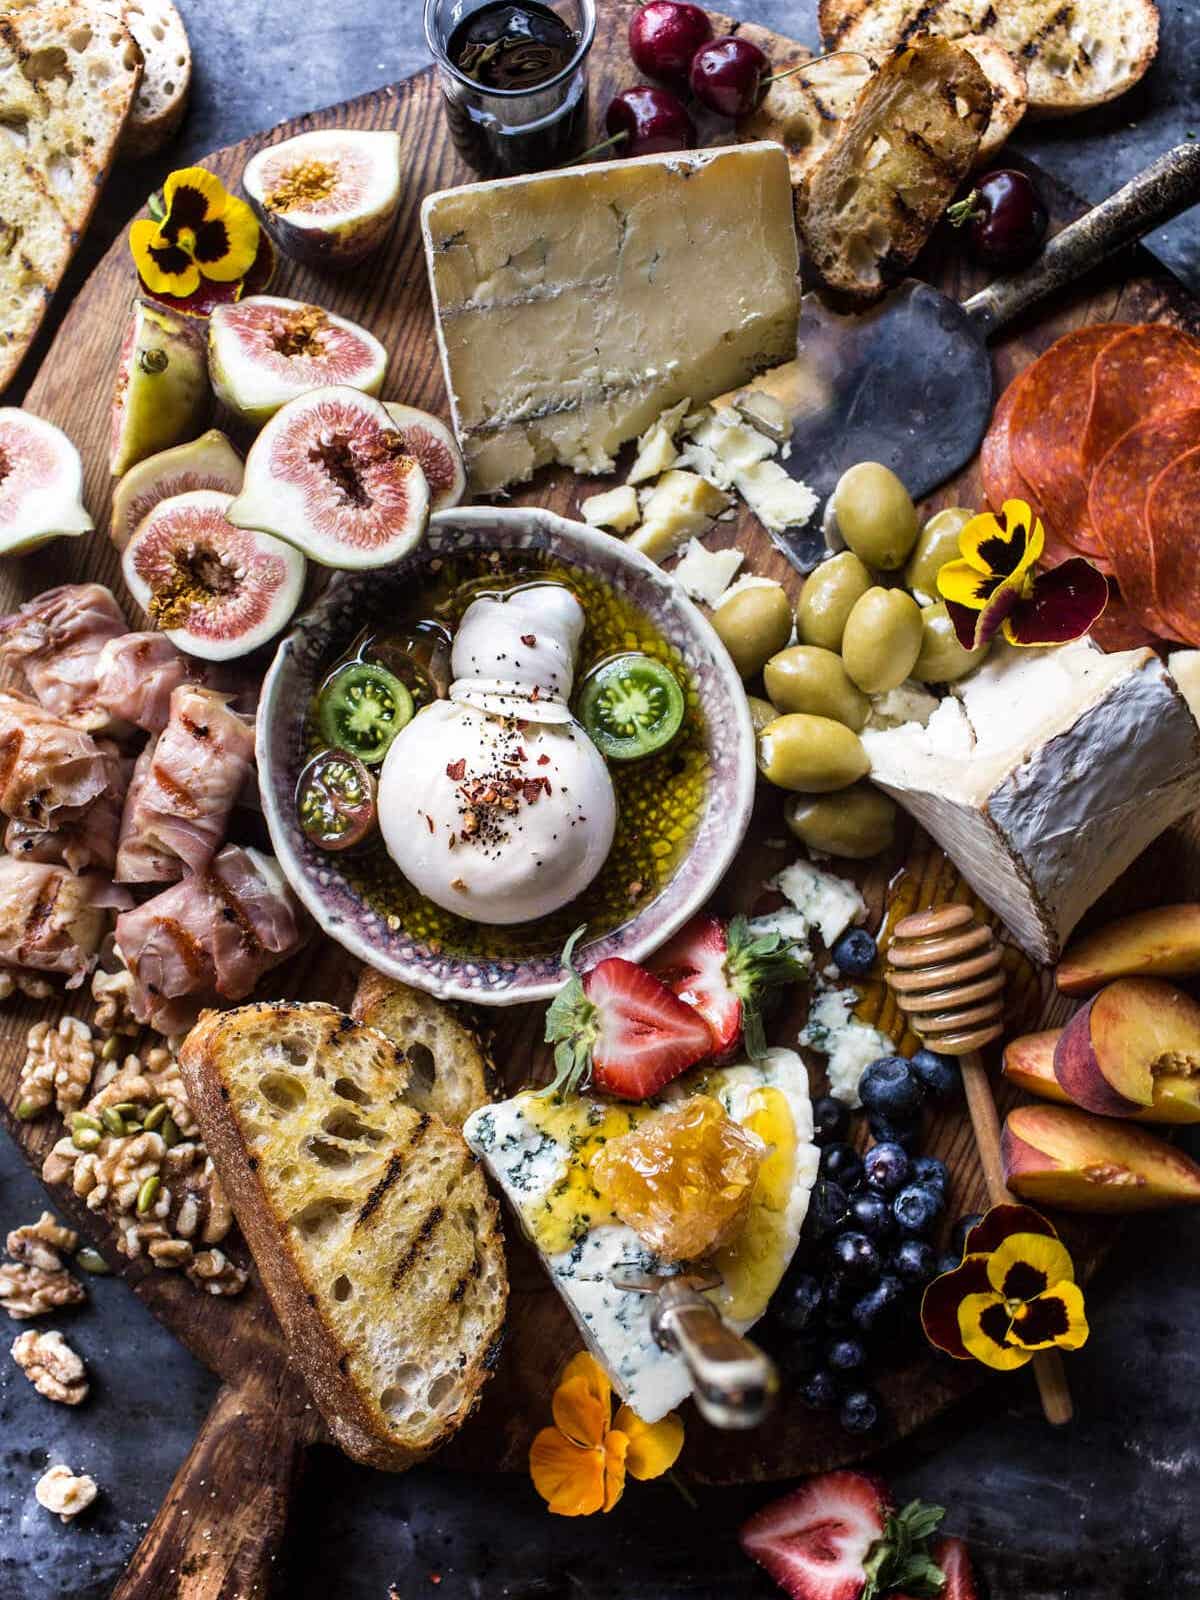 How to Create a Charcuterie Board the French Way